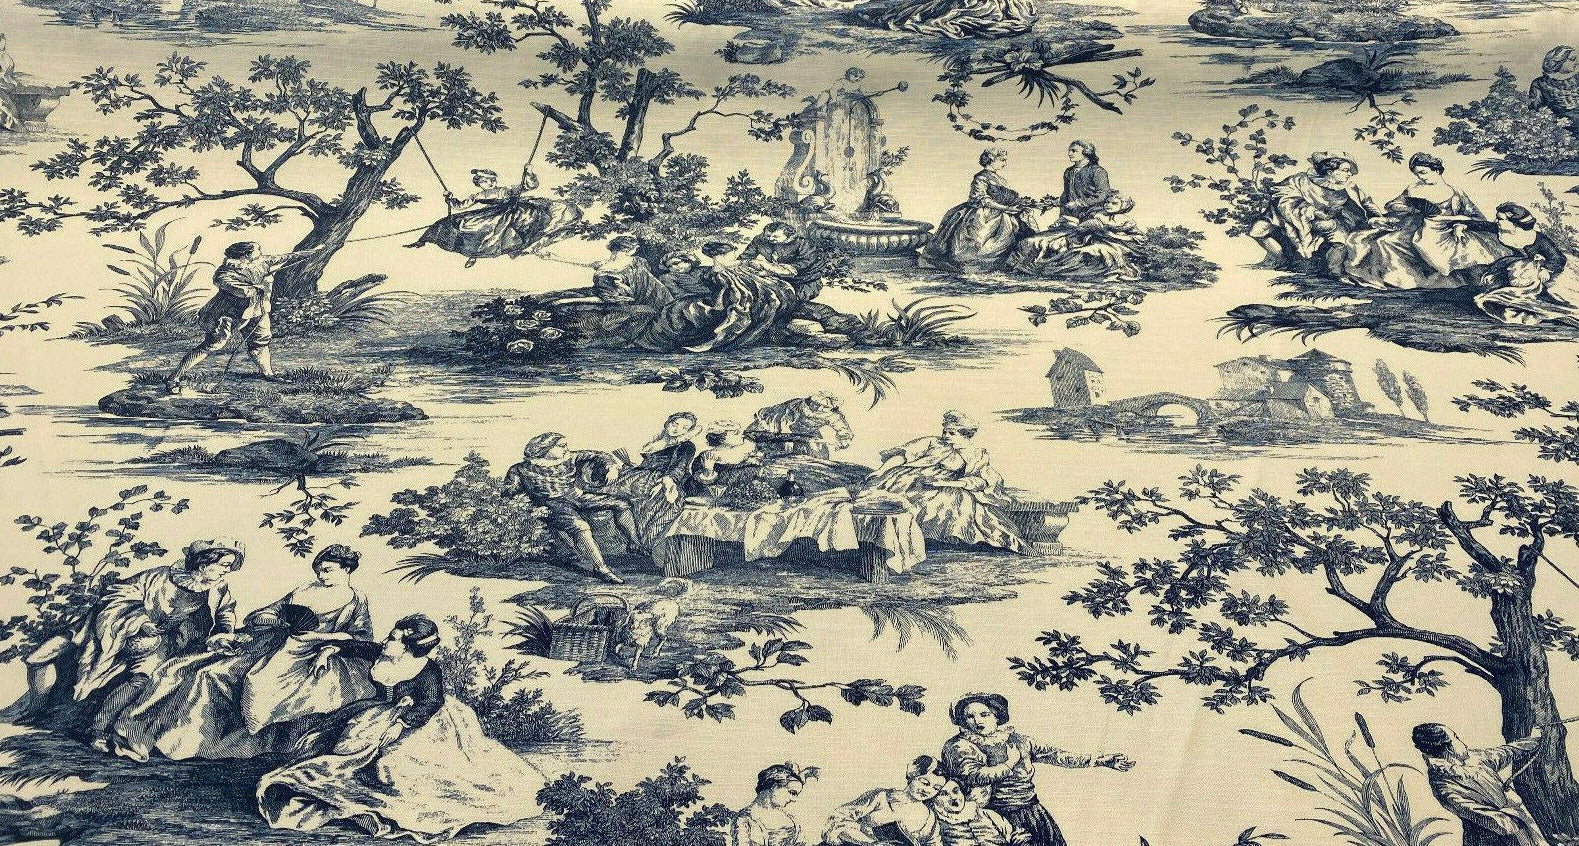 Waverly Toile Blue Charmed Rustic Life Fabric by the yard